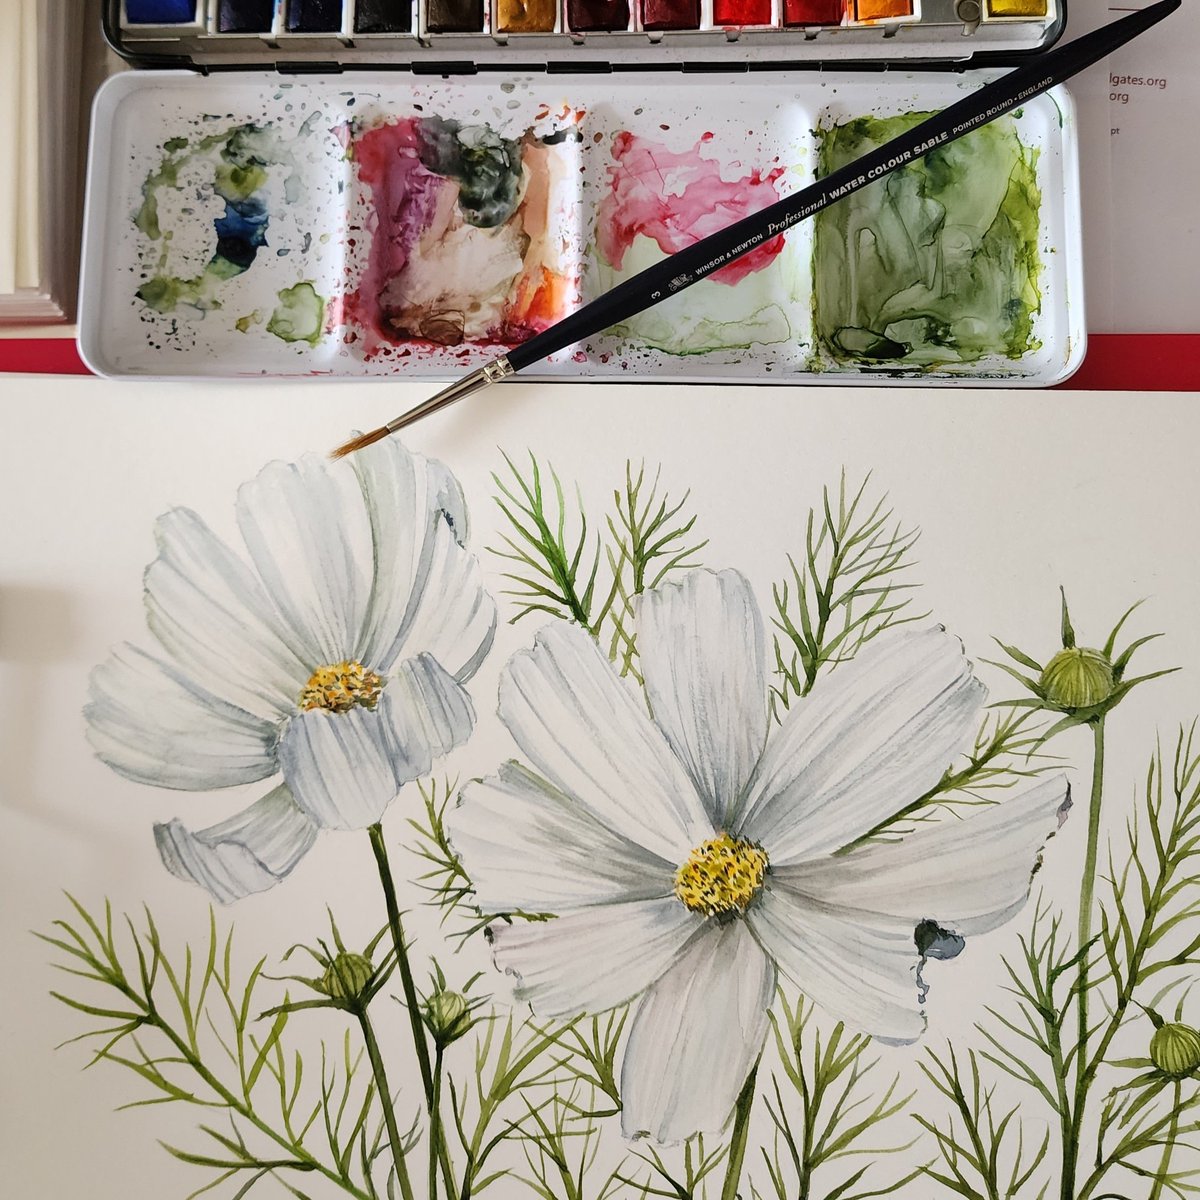 I had a lovely time last weekend painting this white cosmos with @YorkArtSociety at George Smith's garden #watercolor #flowerillustration #floralpainting #cosmos #whitecosmos #botanicalart